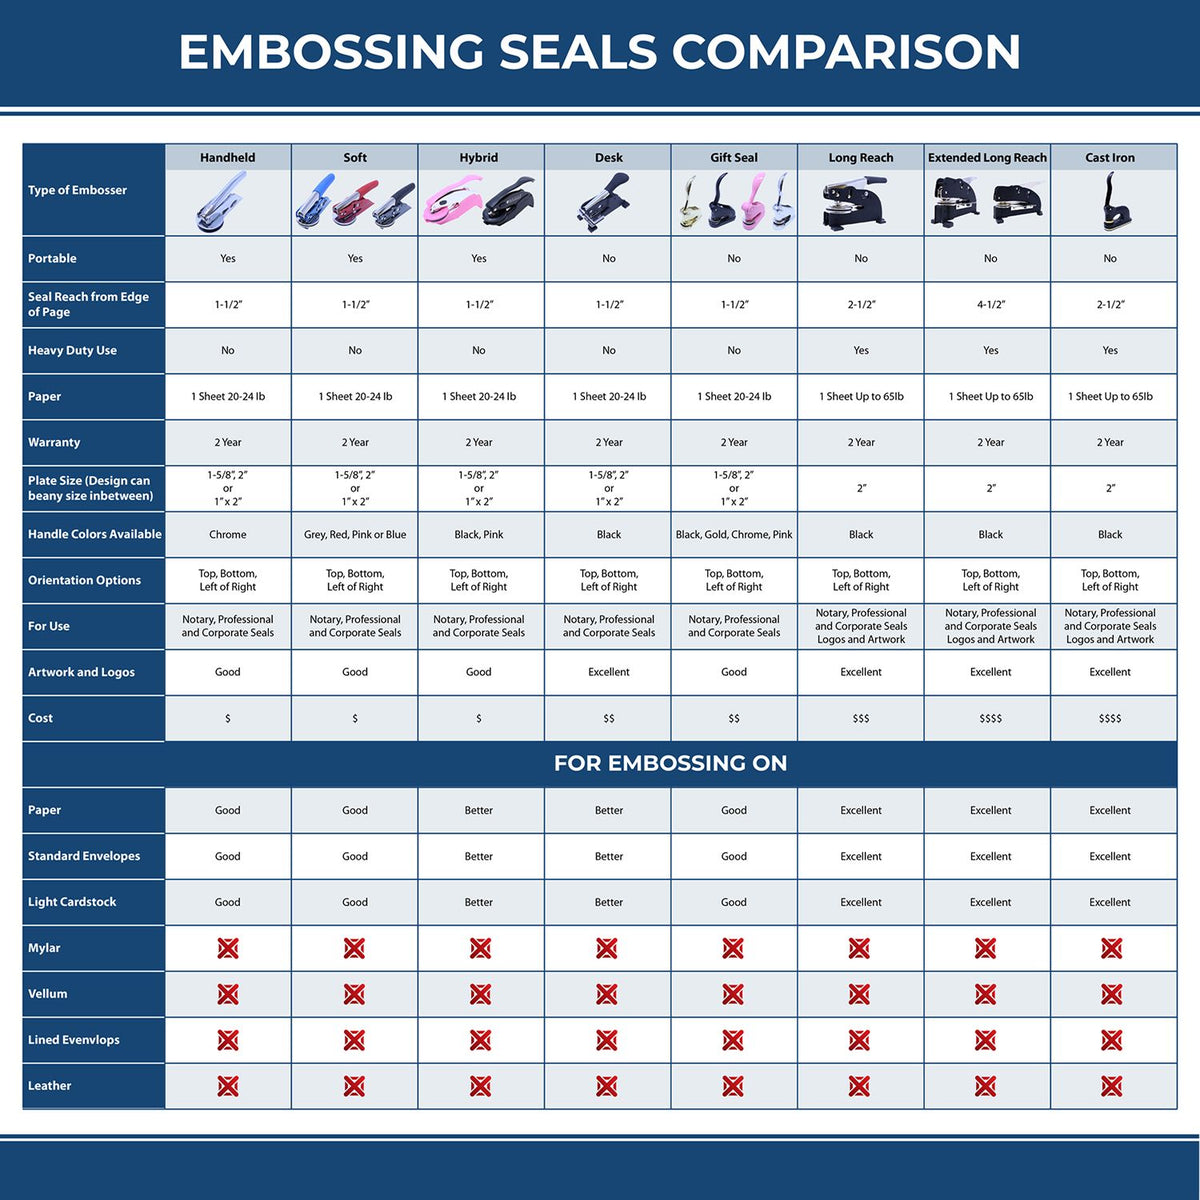 A comparison chart for the different types of mount models available for the Handheld Oklahoma Architect Seal Embosser.